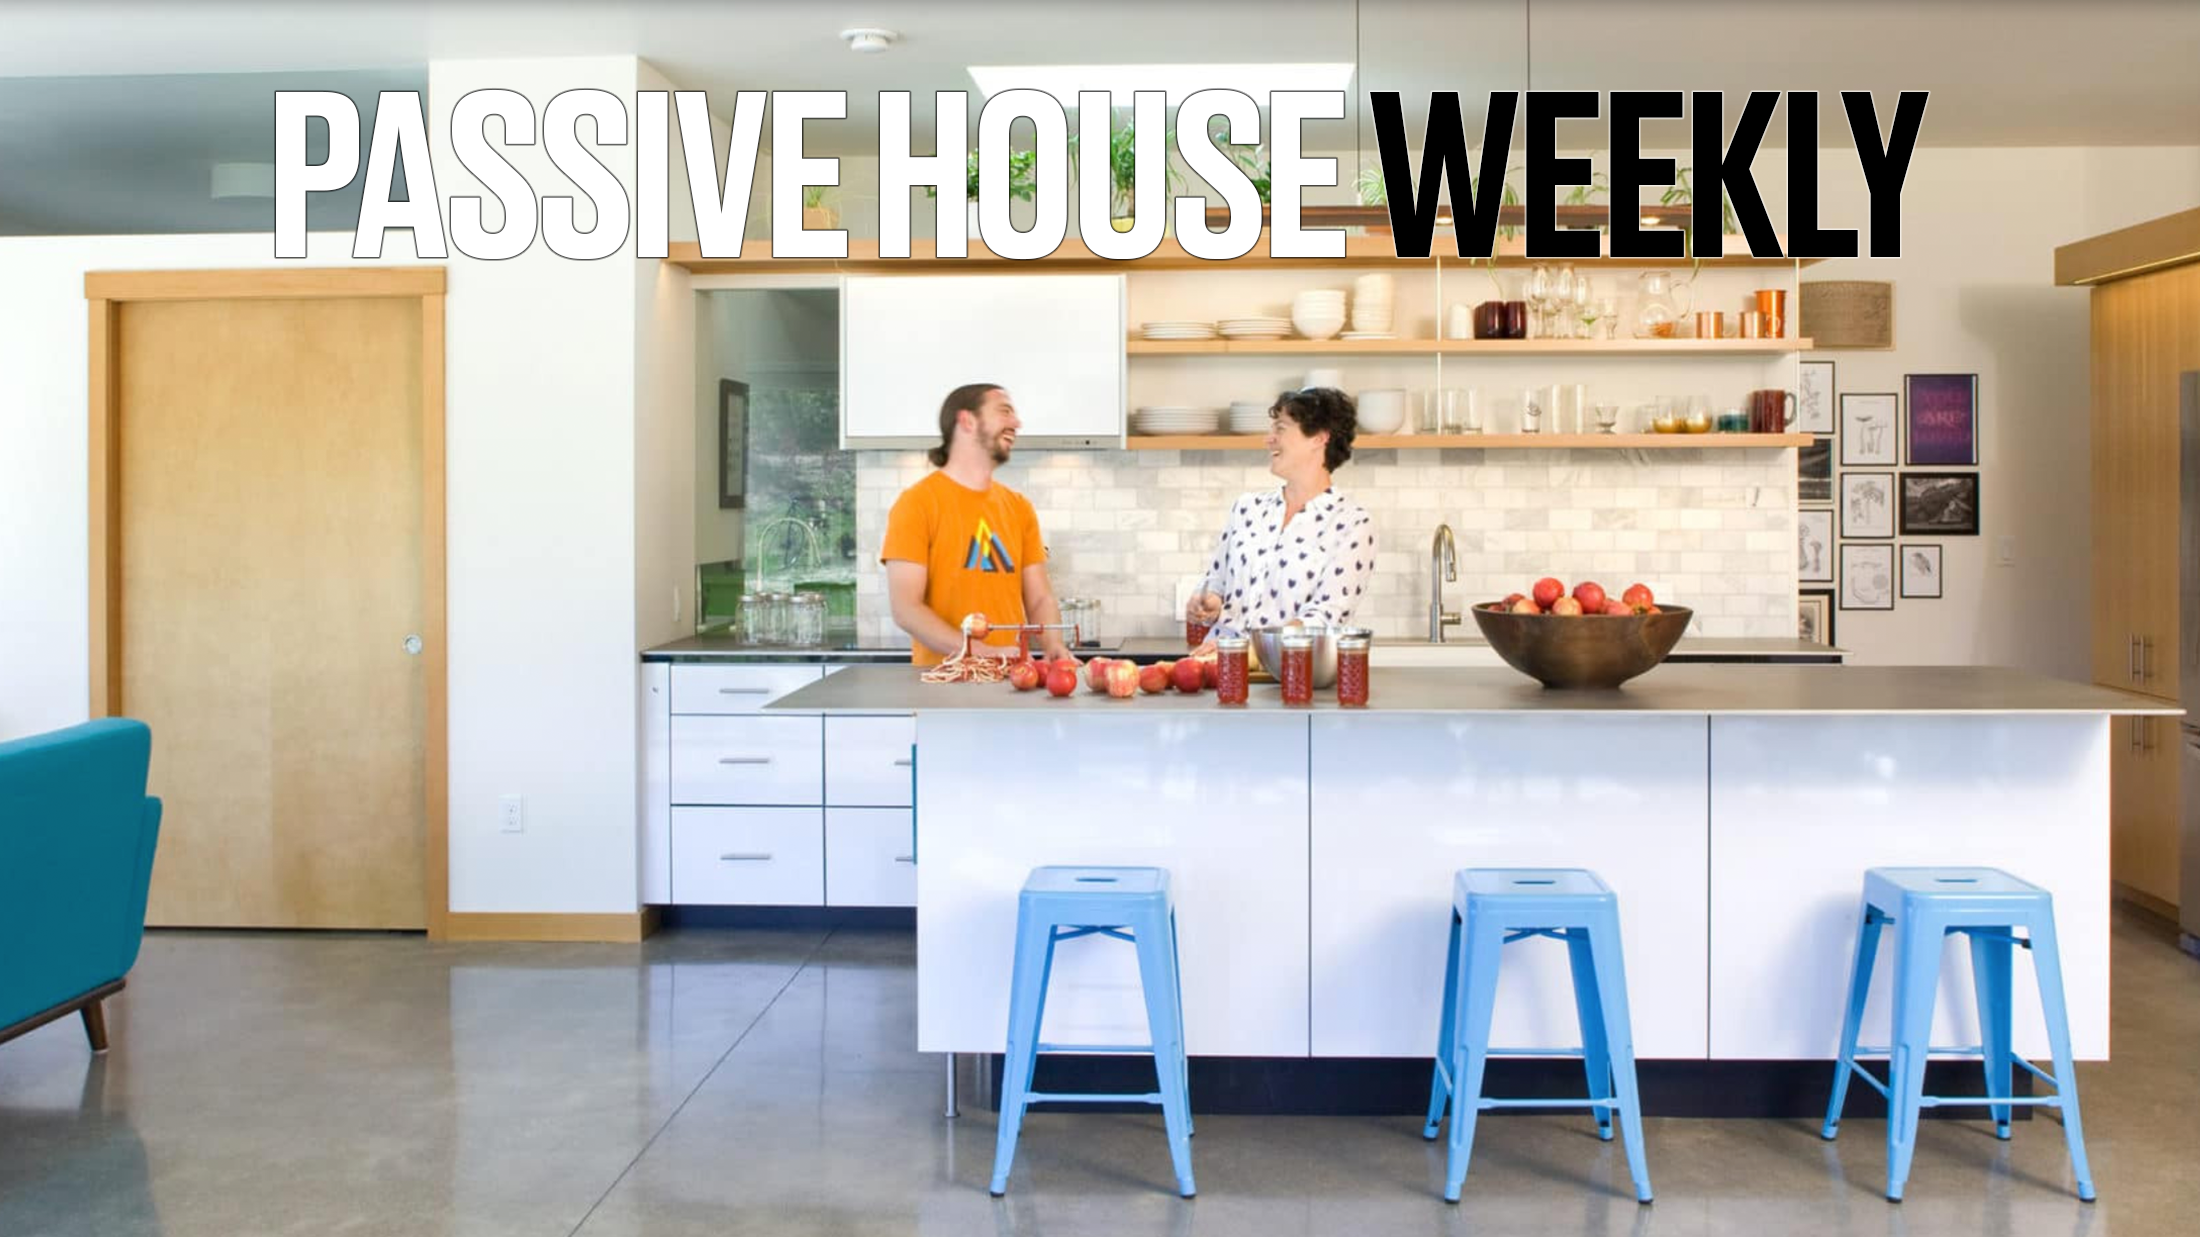 Passive House Weekly January 9th, 2022